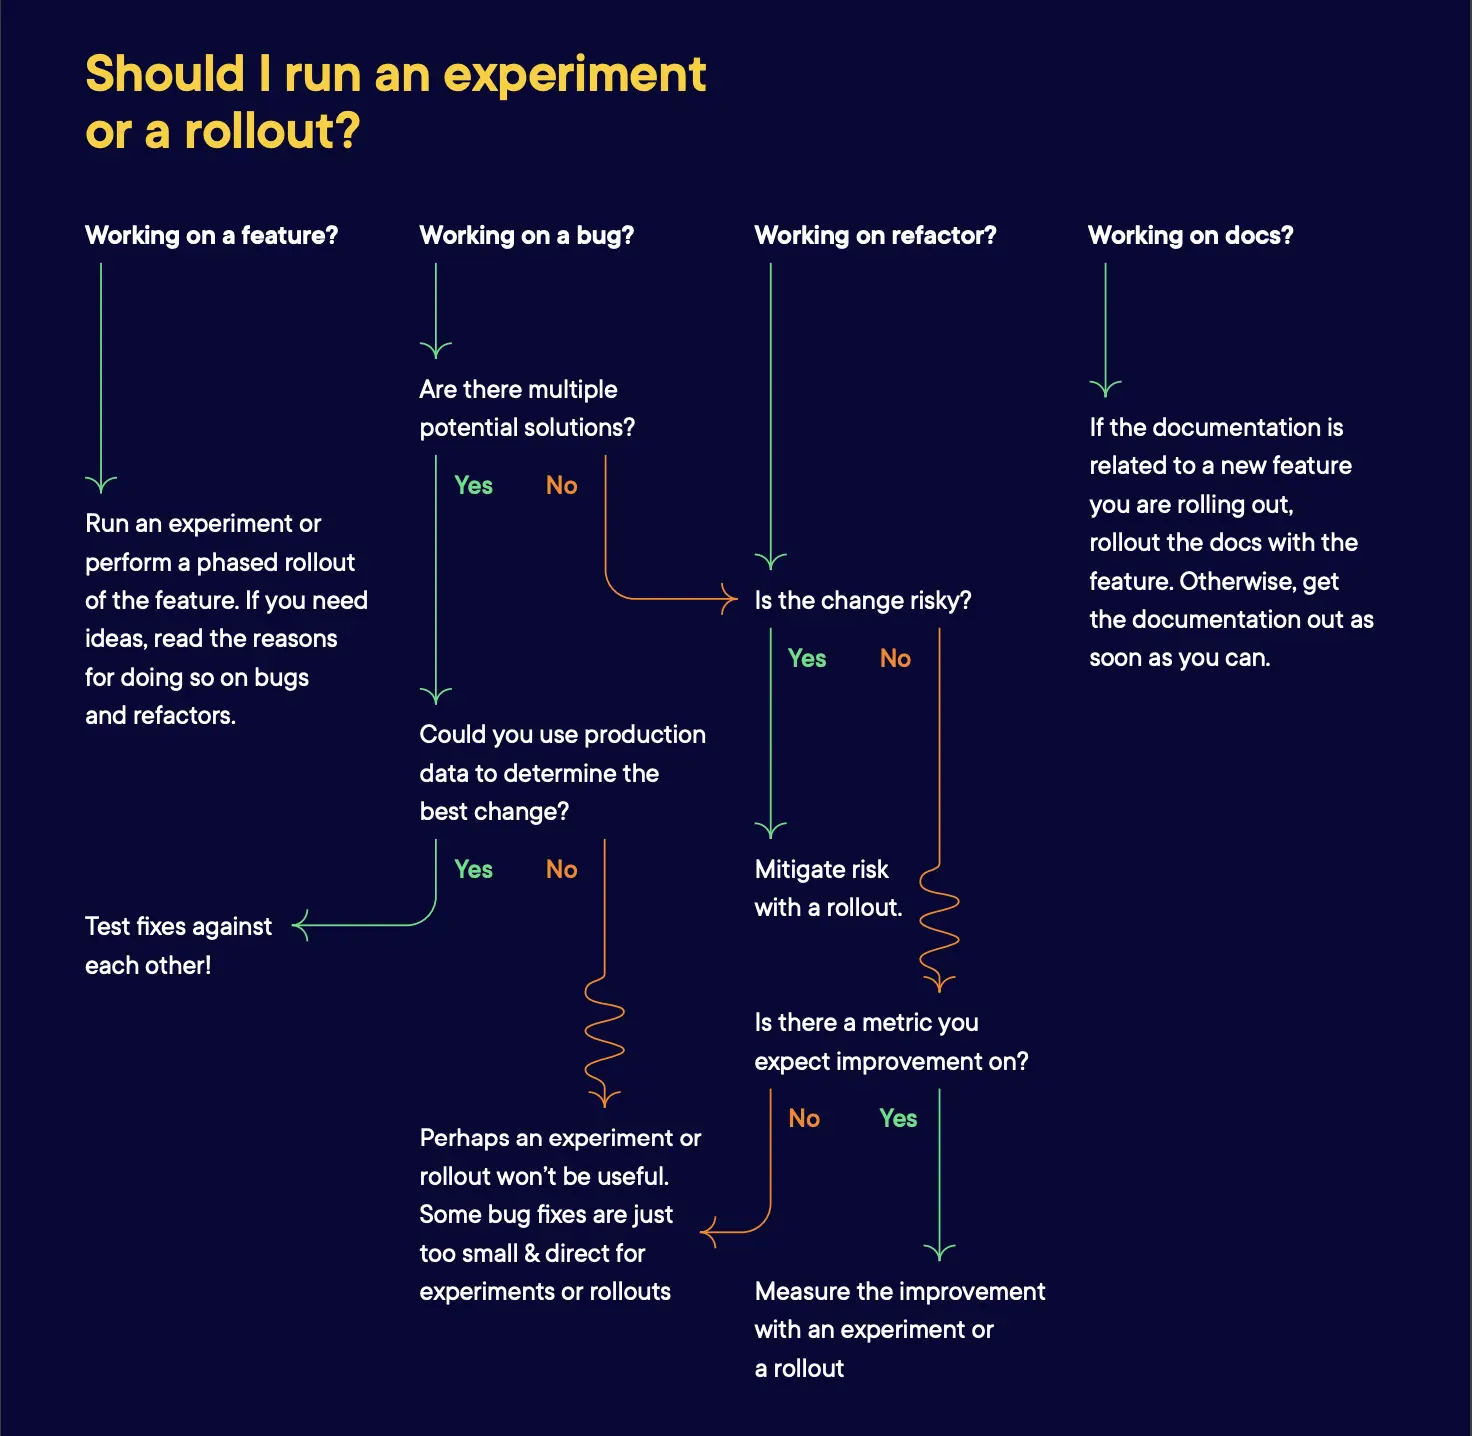 Image explaining should you run an experiment and do a roll out